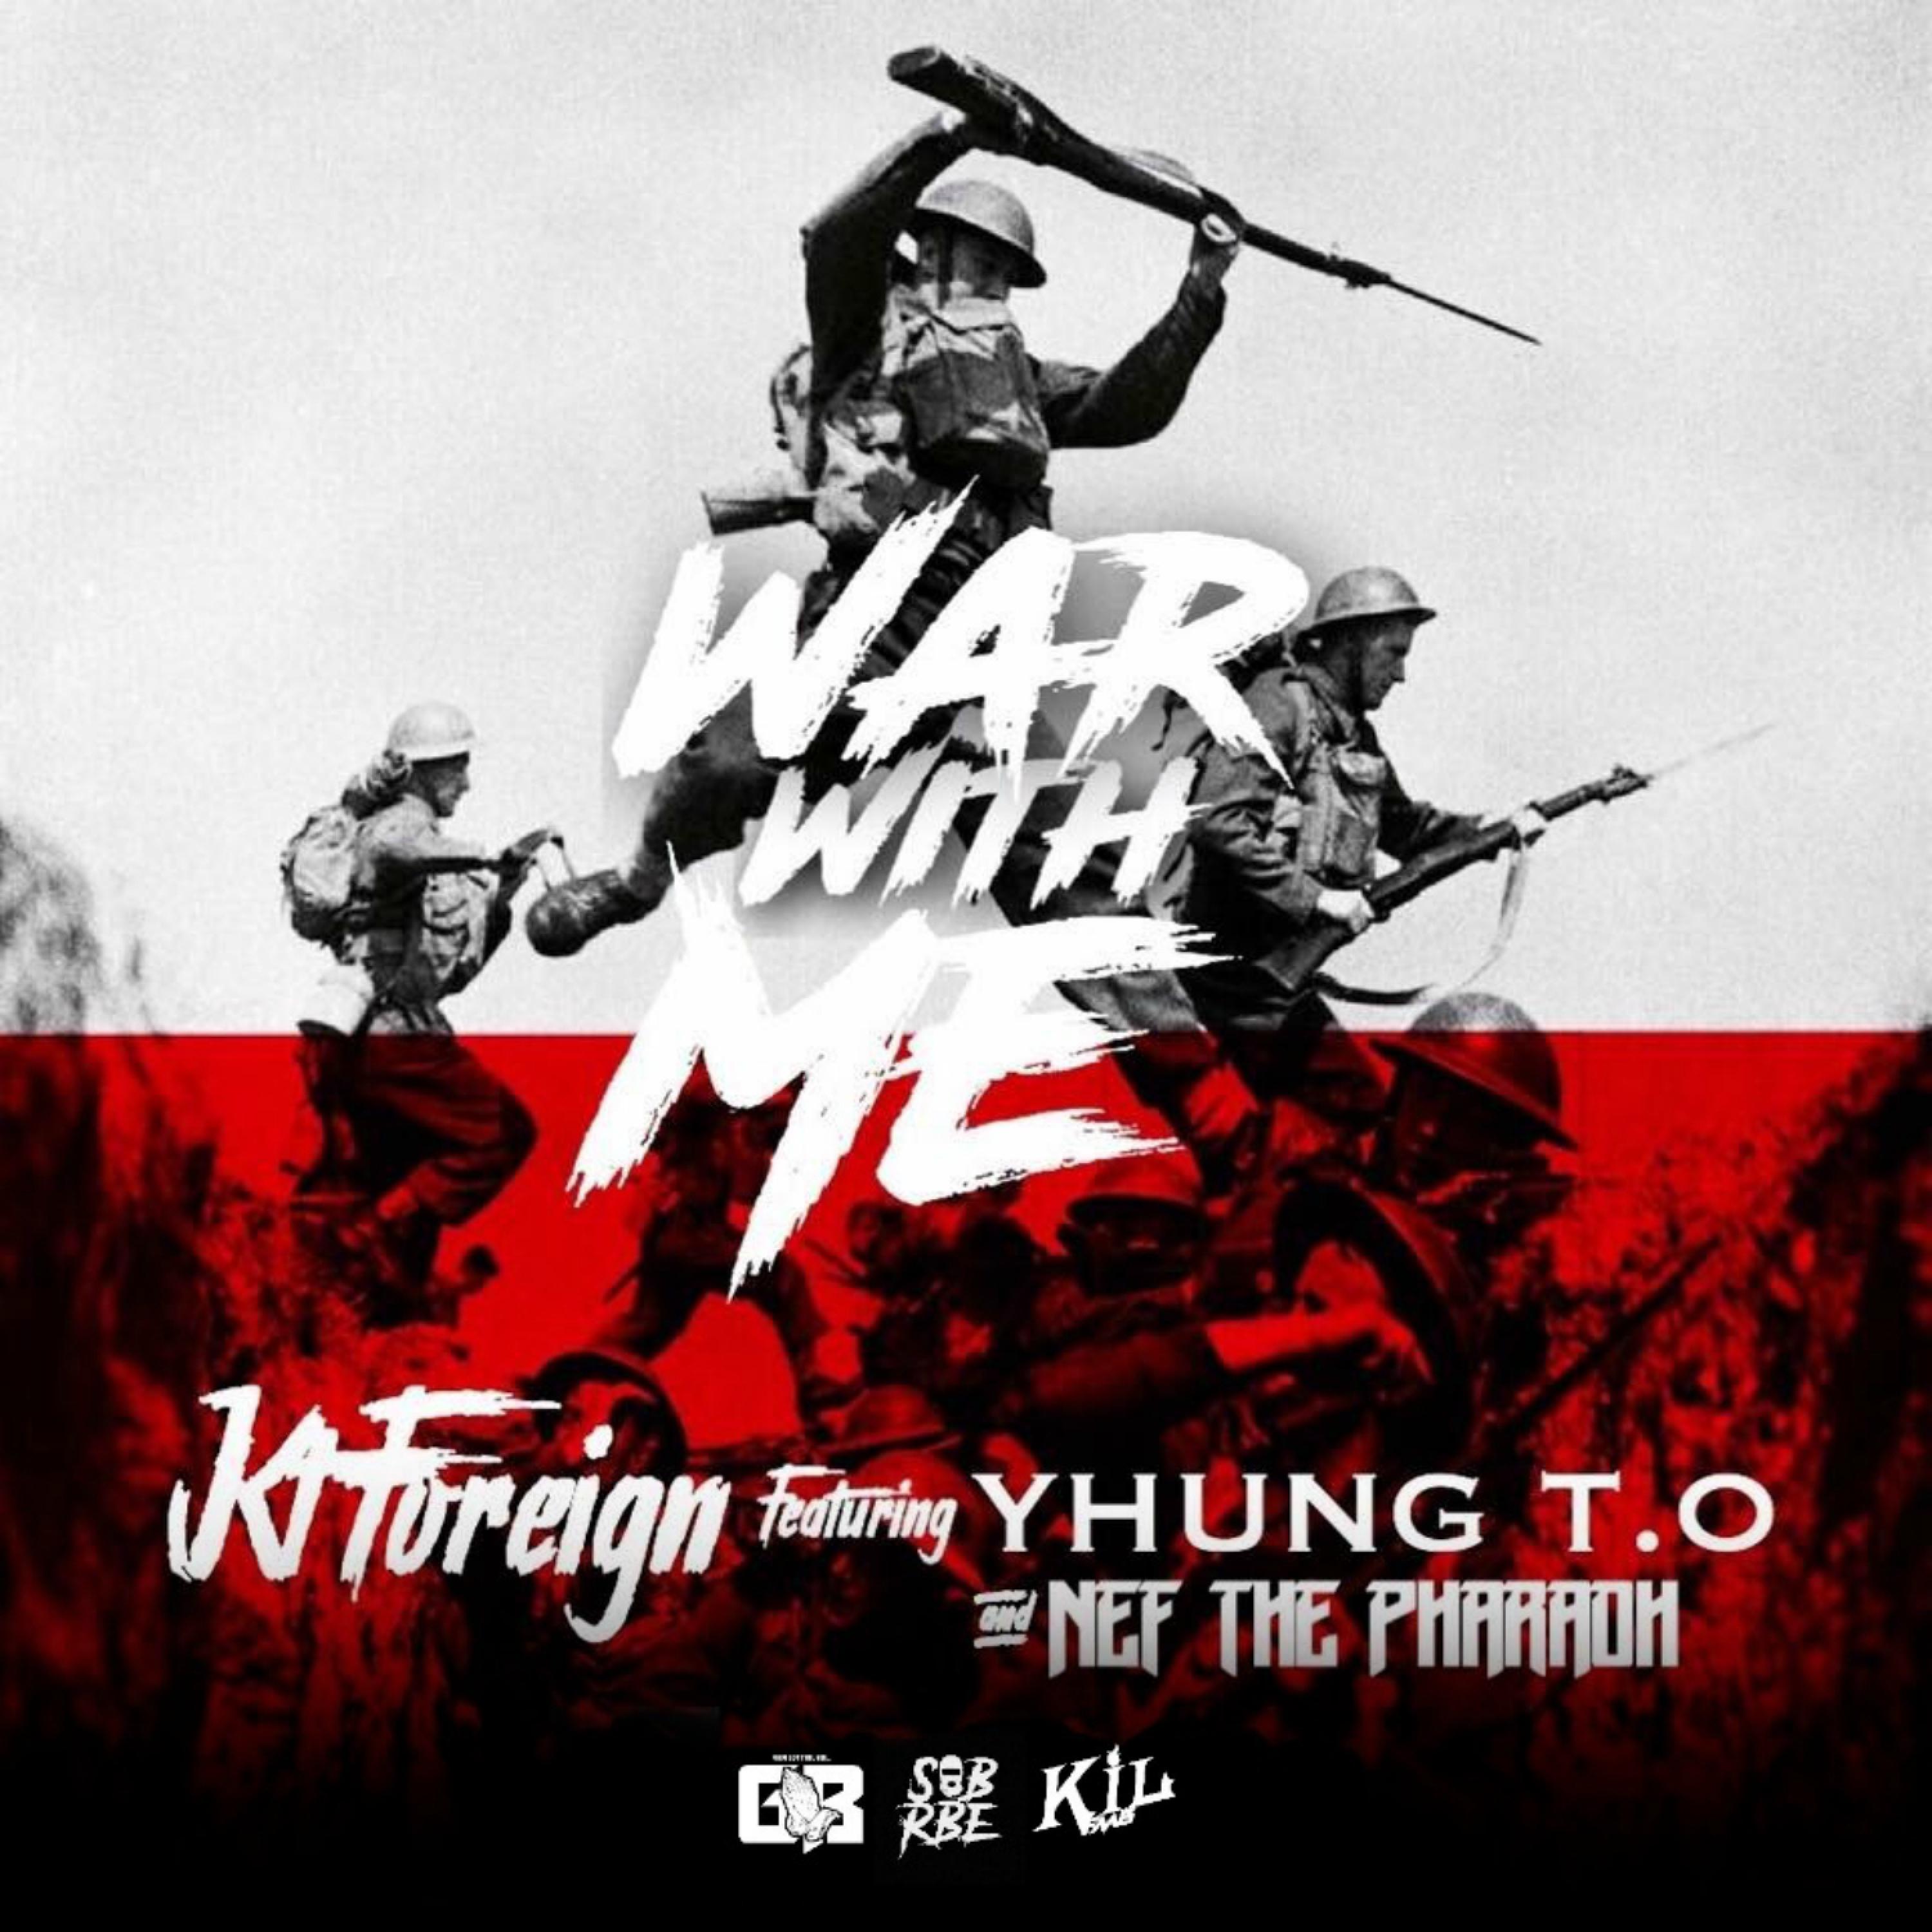 War with Me (feat. Nef the Pharaoh & Yhung T.O)